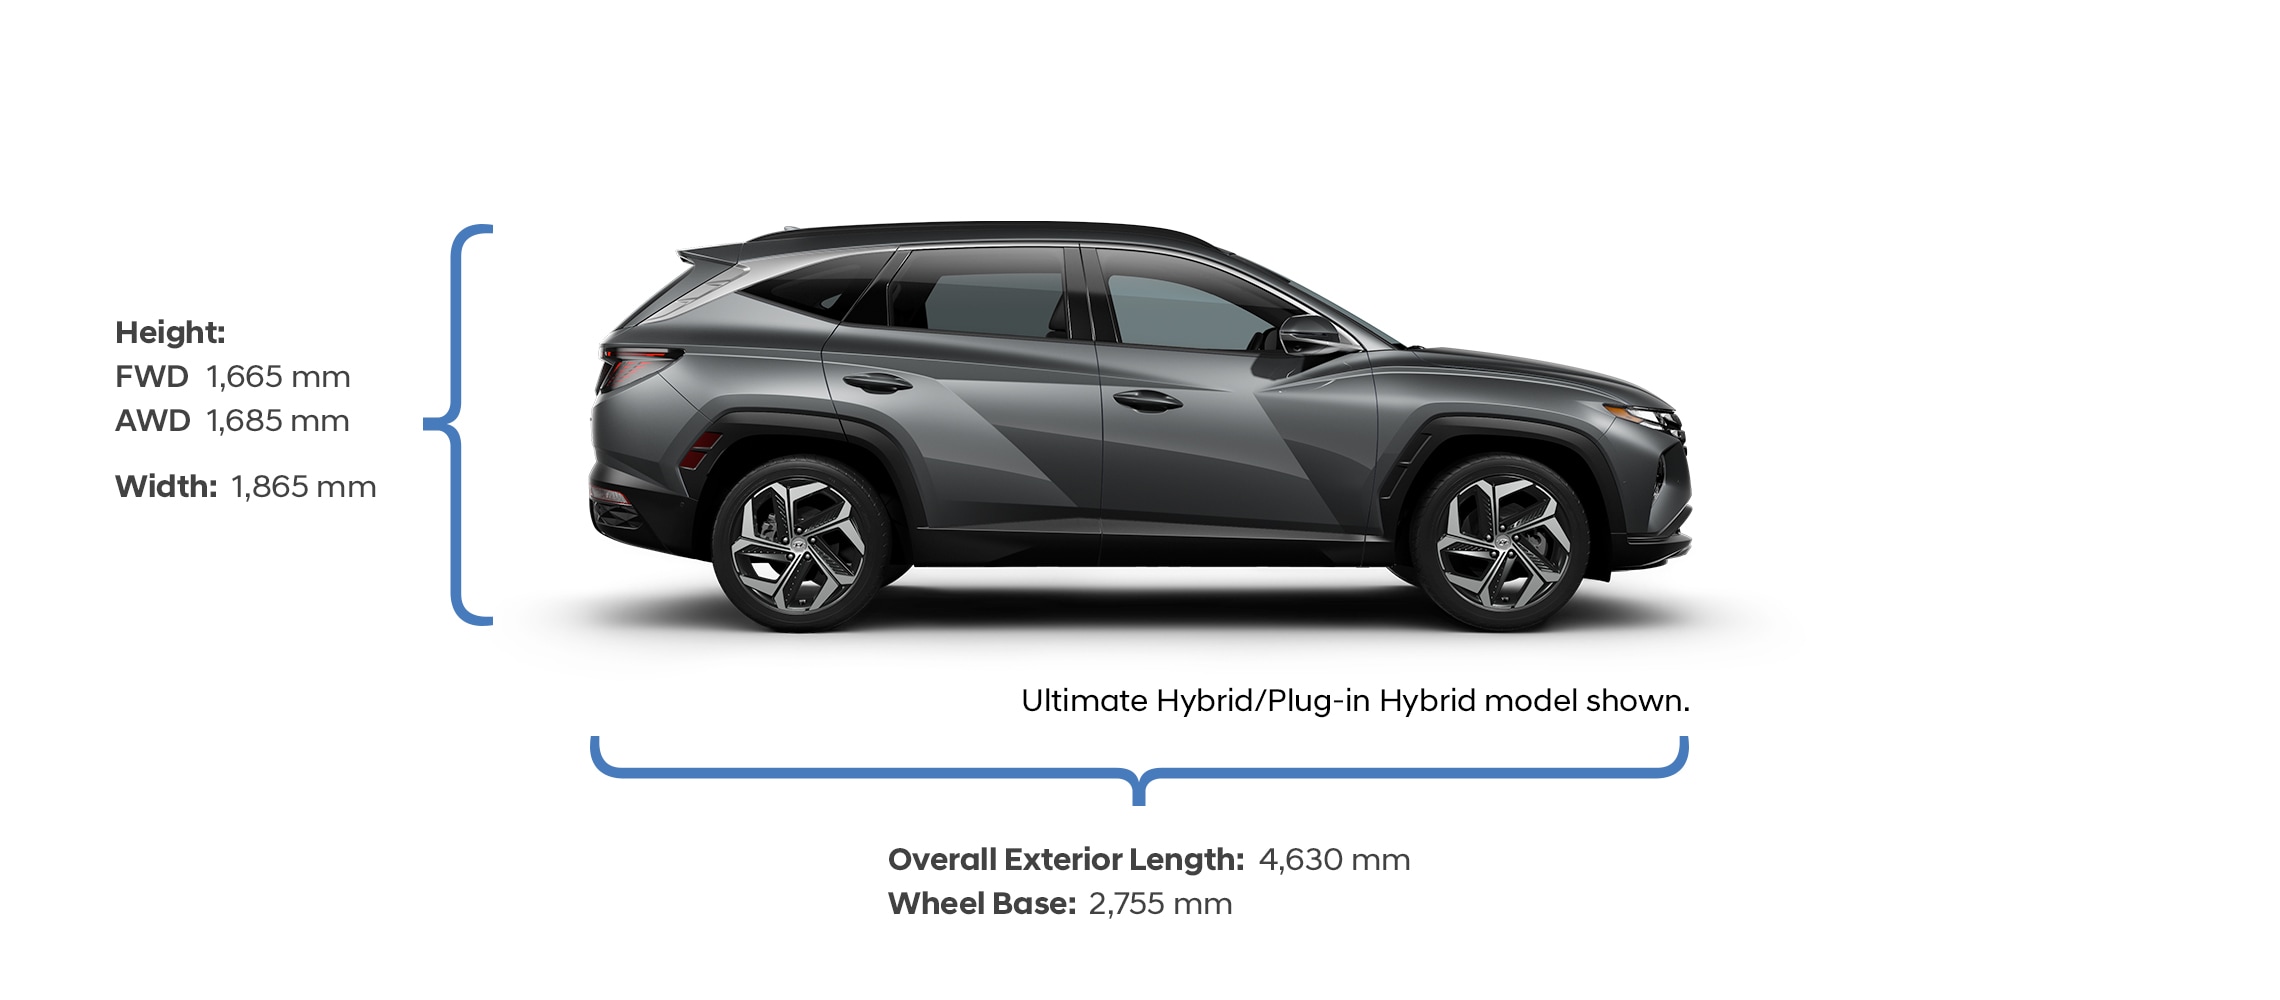 Height and width specifications of the 2022 Tucson